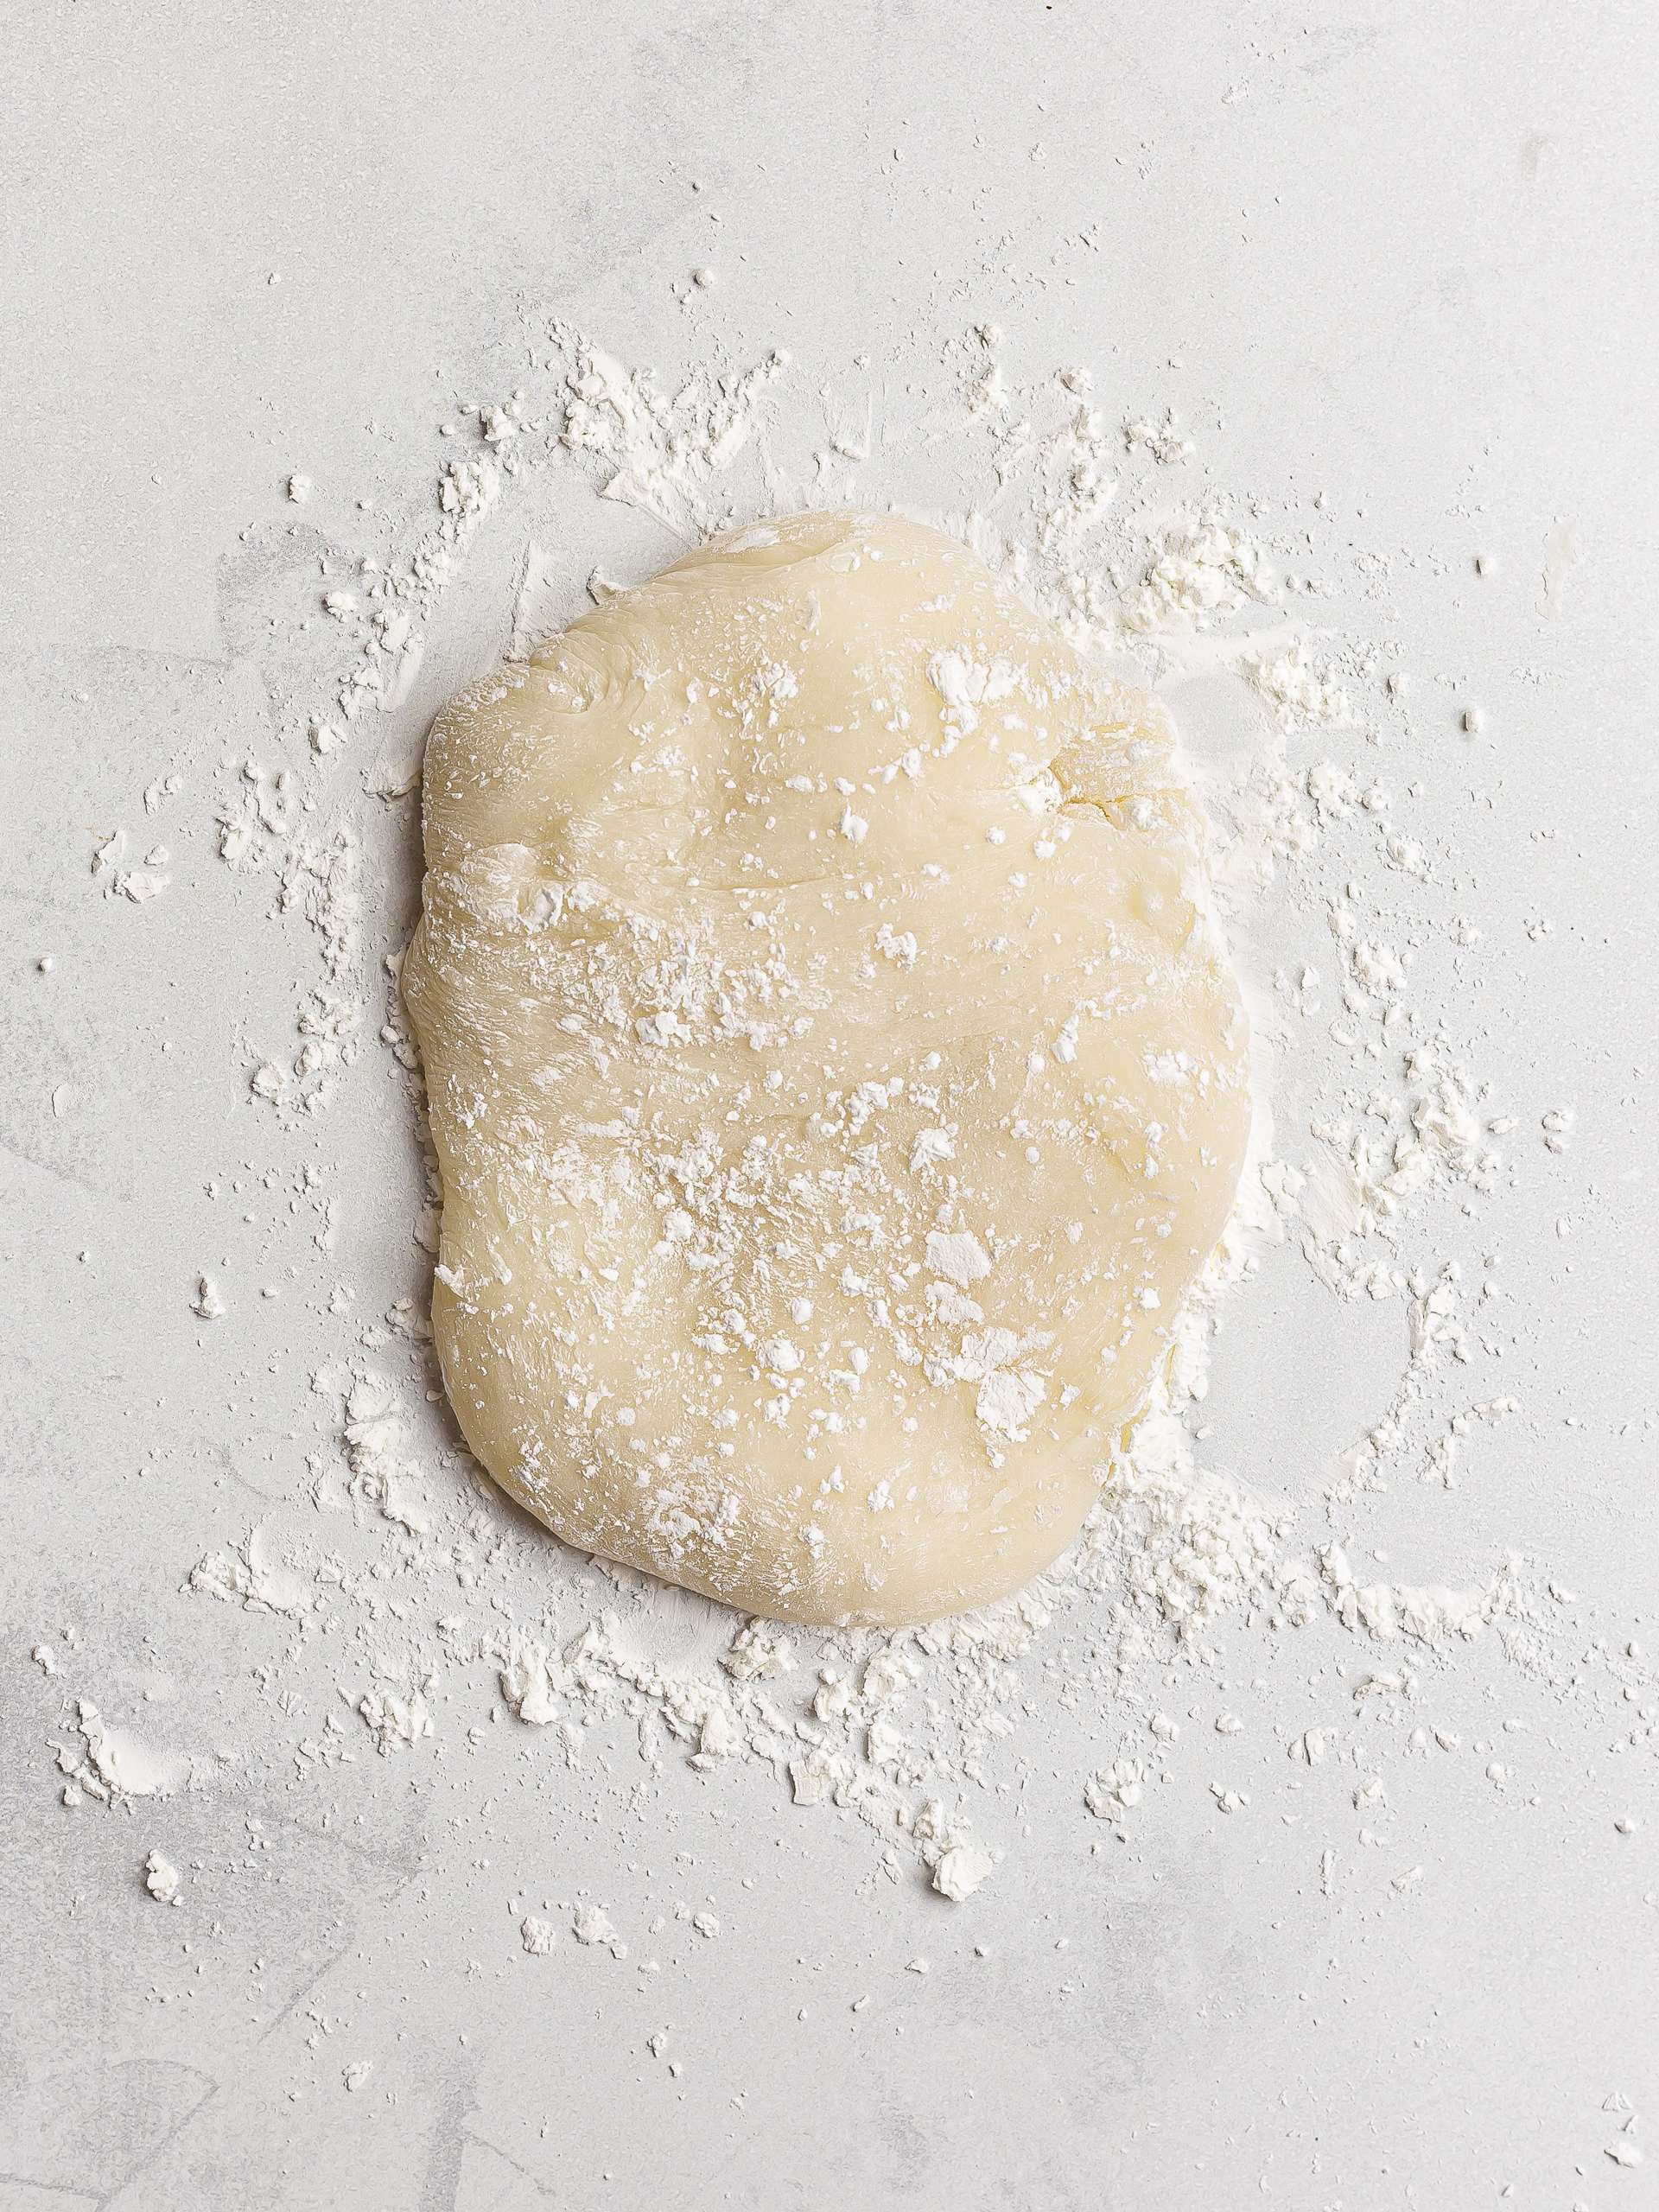 mochi dough dusted with starch to make it less sticky